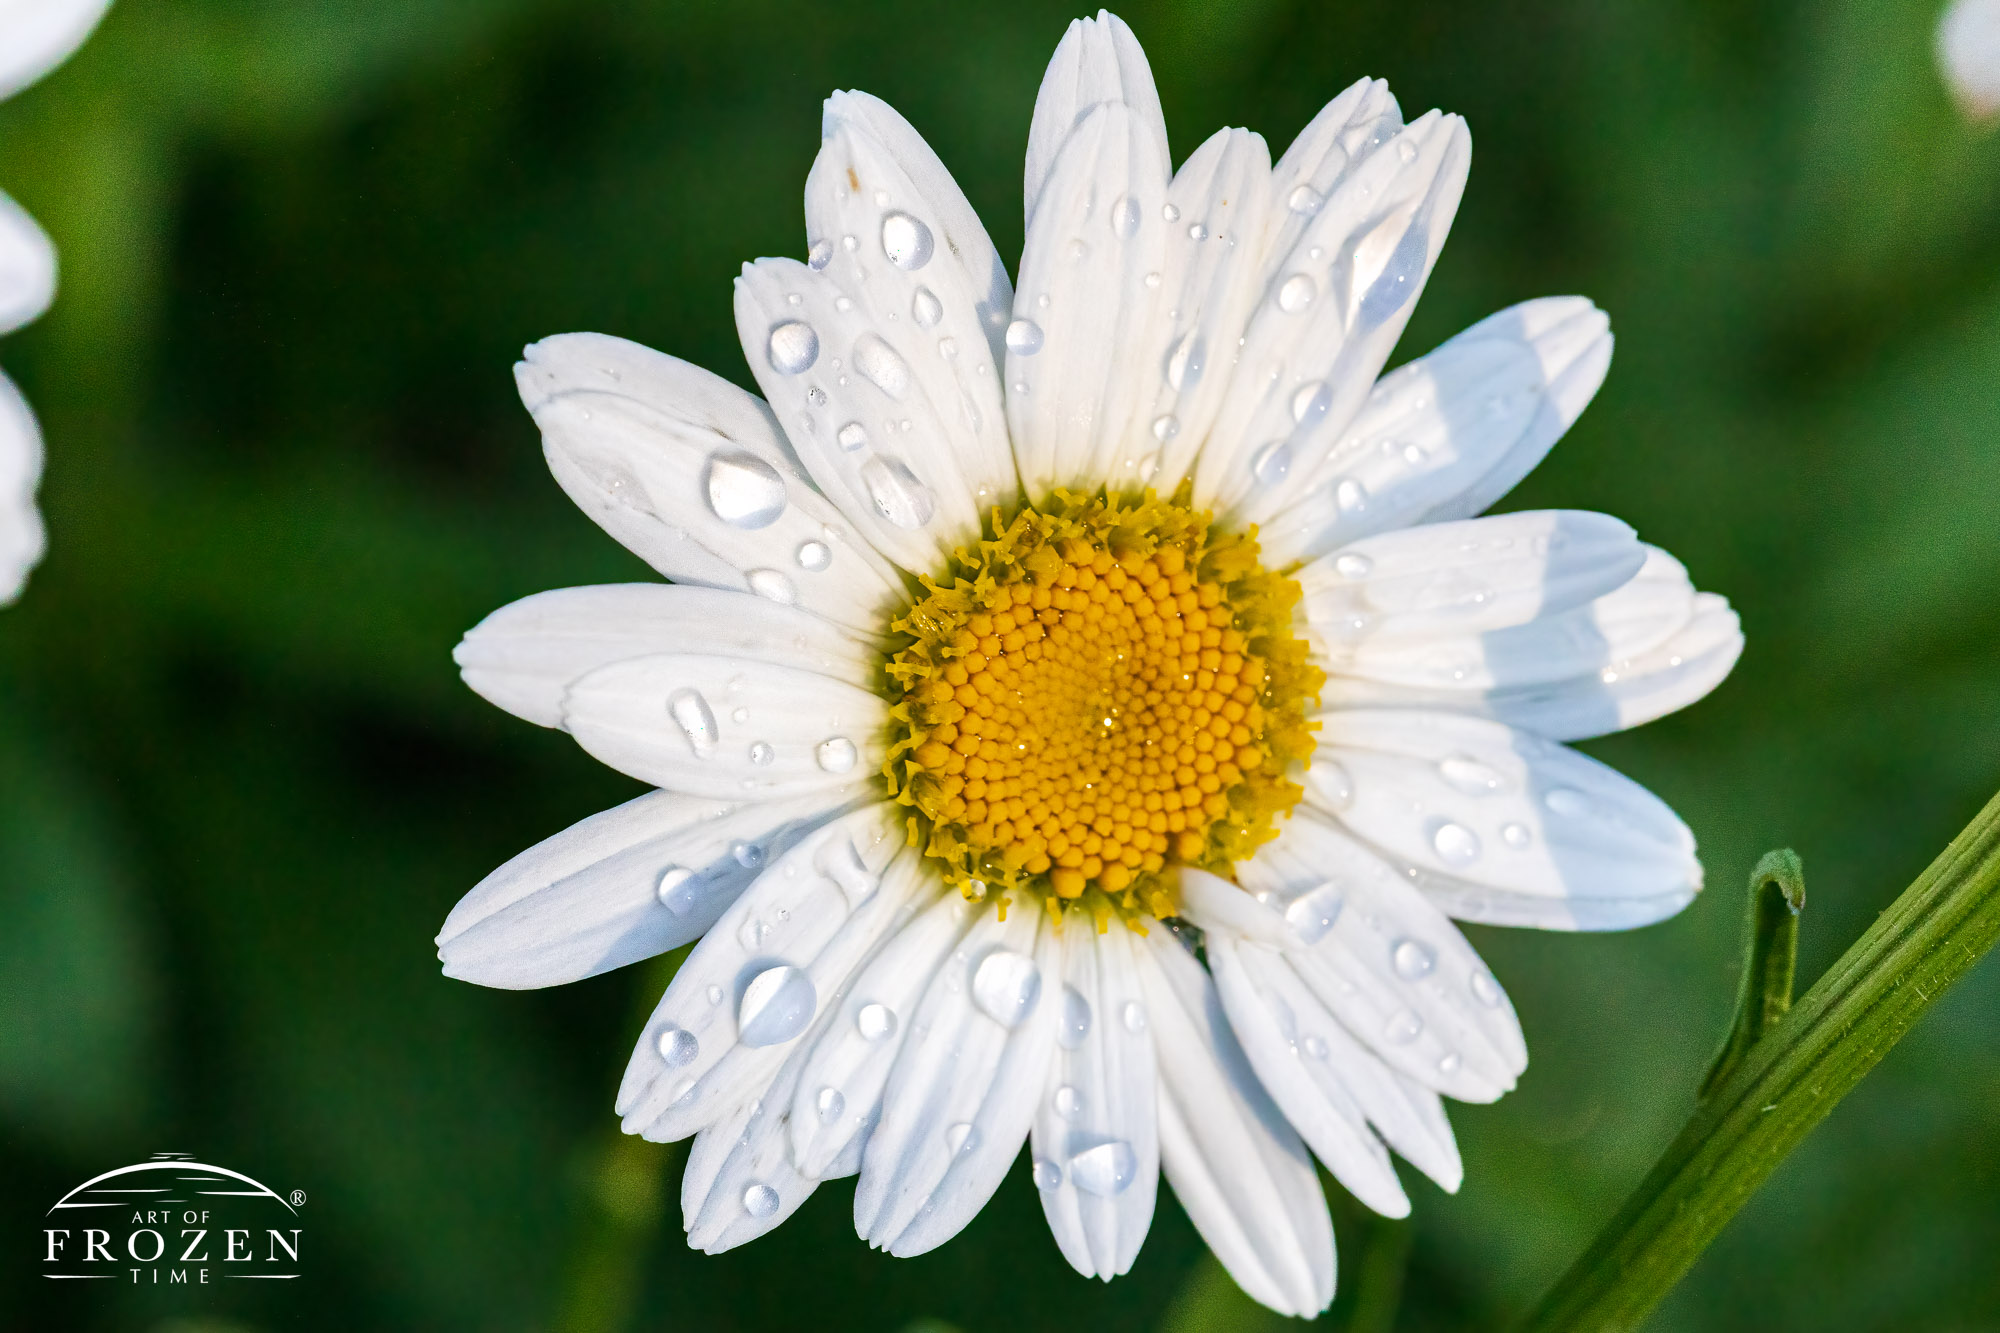 Close view of an Ox-eye Daisy featuring its many white petals and yellow sunflower-like center holding raindrops